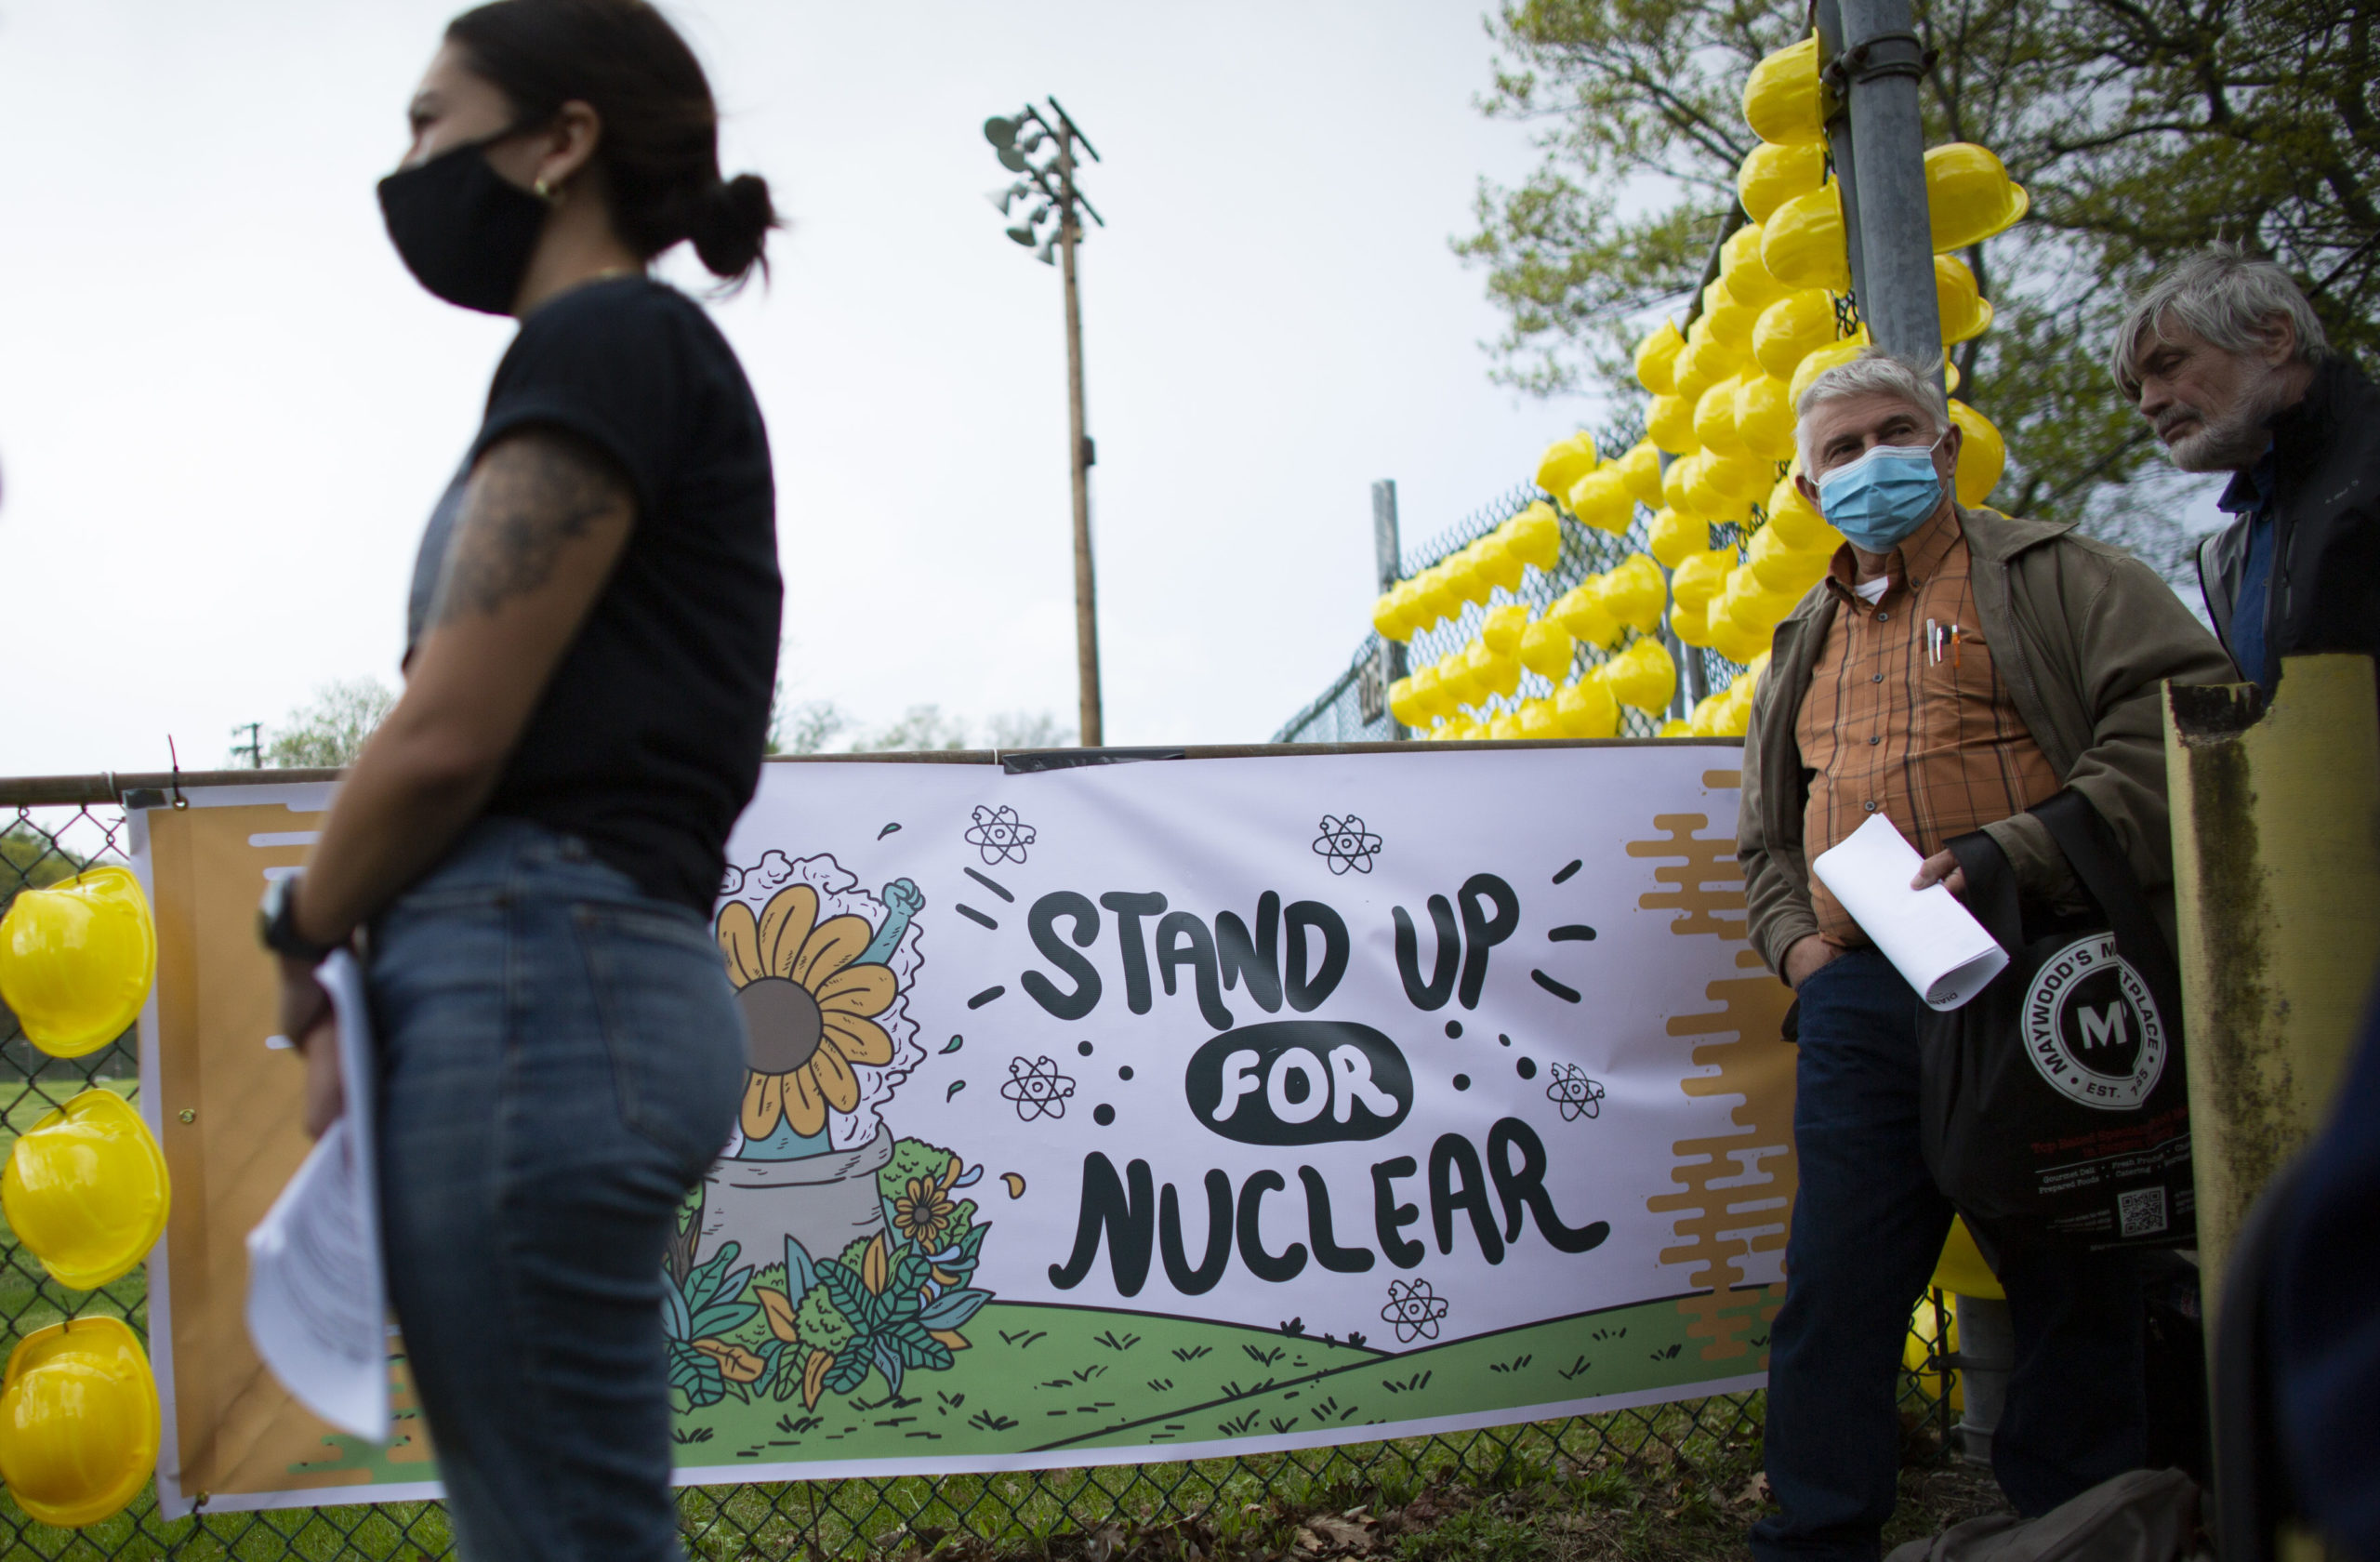 People attend a ceremony to thank workers of the nuclear plant Indian Point on April 30, 2021 in Buchanan, New York. (Kena Betancur/Getty Images)